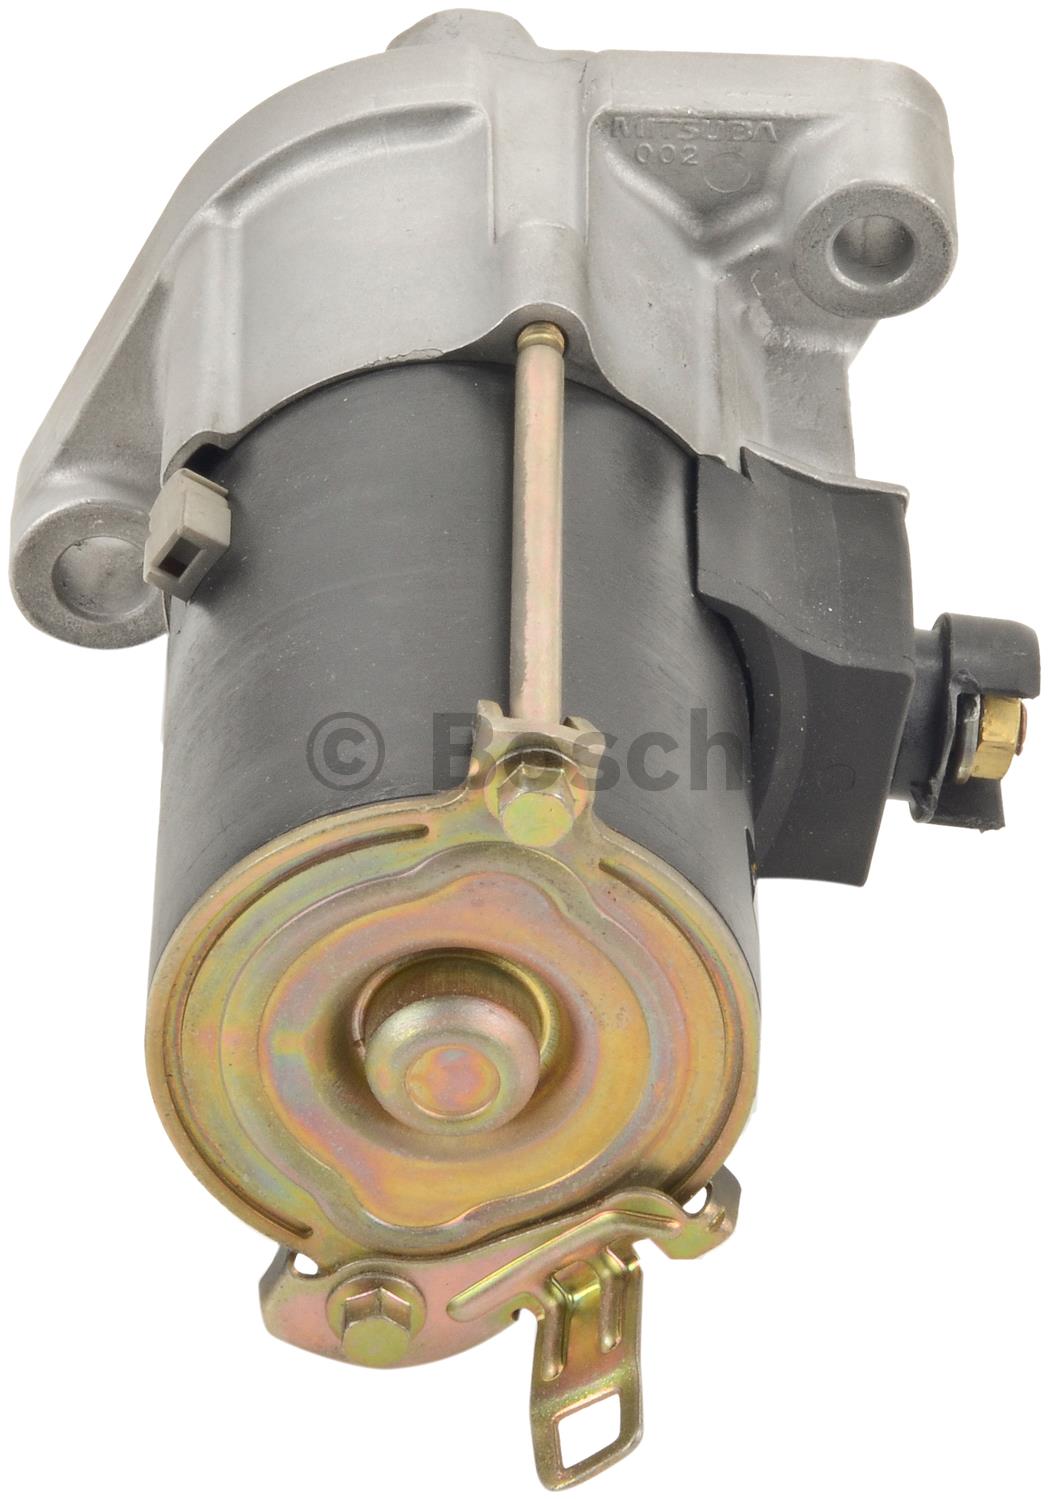 Show details for Bosch SR1346X Premium 100% Remanufactured Starter; Built For Extremes! Bosch Starters Are 100% Factory Tested To Ensure Reliable Performance, Under Extremes Of Heat, Cold And High Demand.; All Bosch Starters Are Designed To Perform Equal To Or Better Than The Original